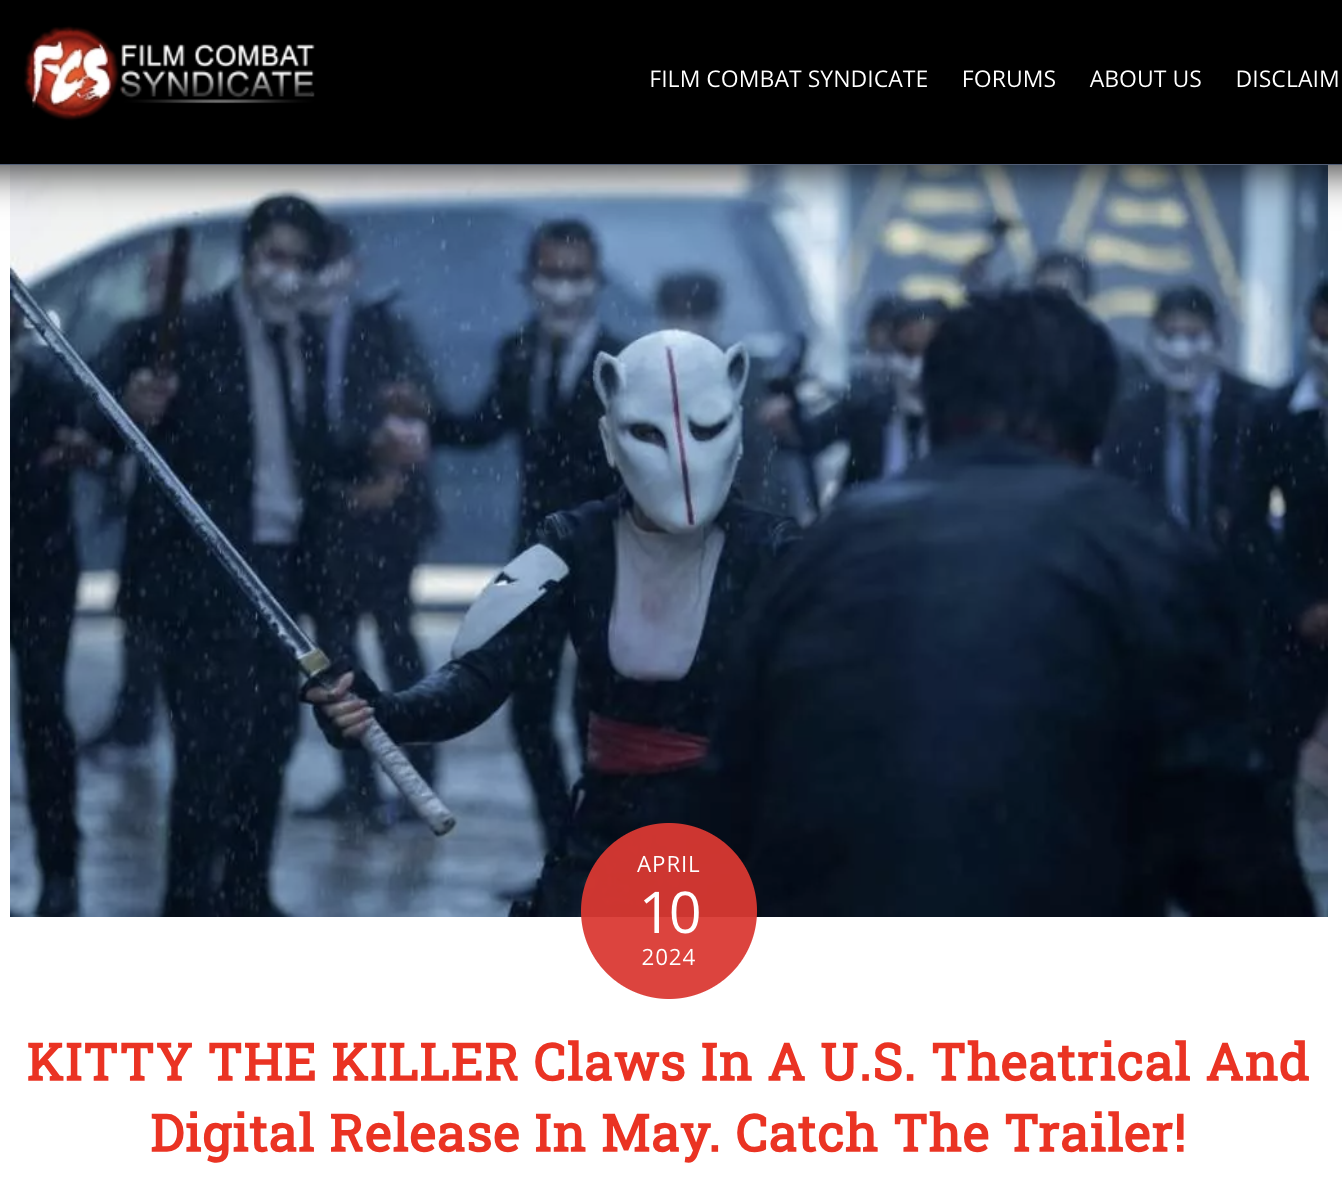 KITTY THE KILLER Claws In A U.S. Theatrical And Digital Release In May. Catch The Trailer!